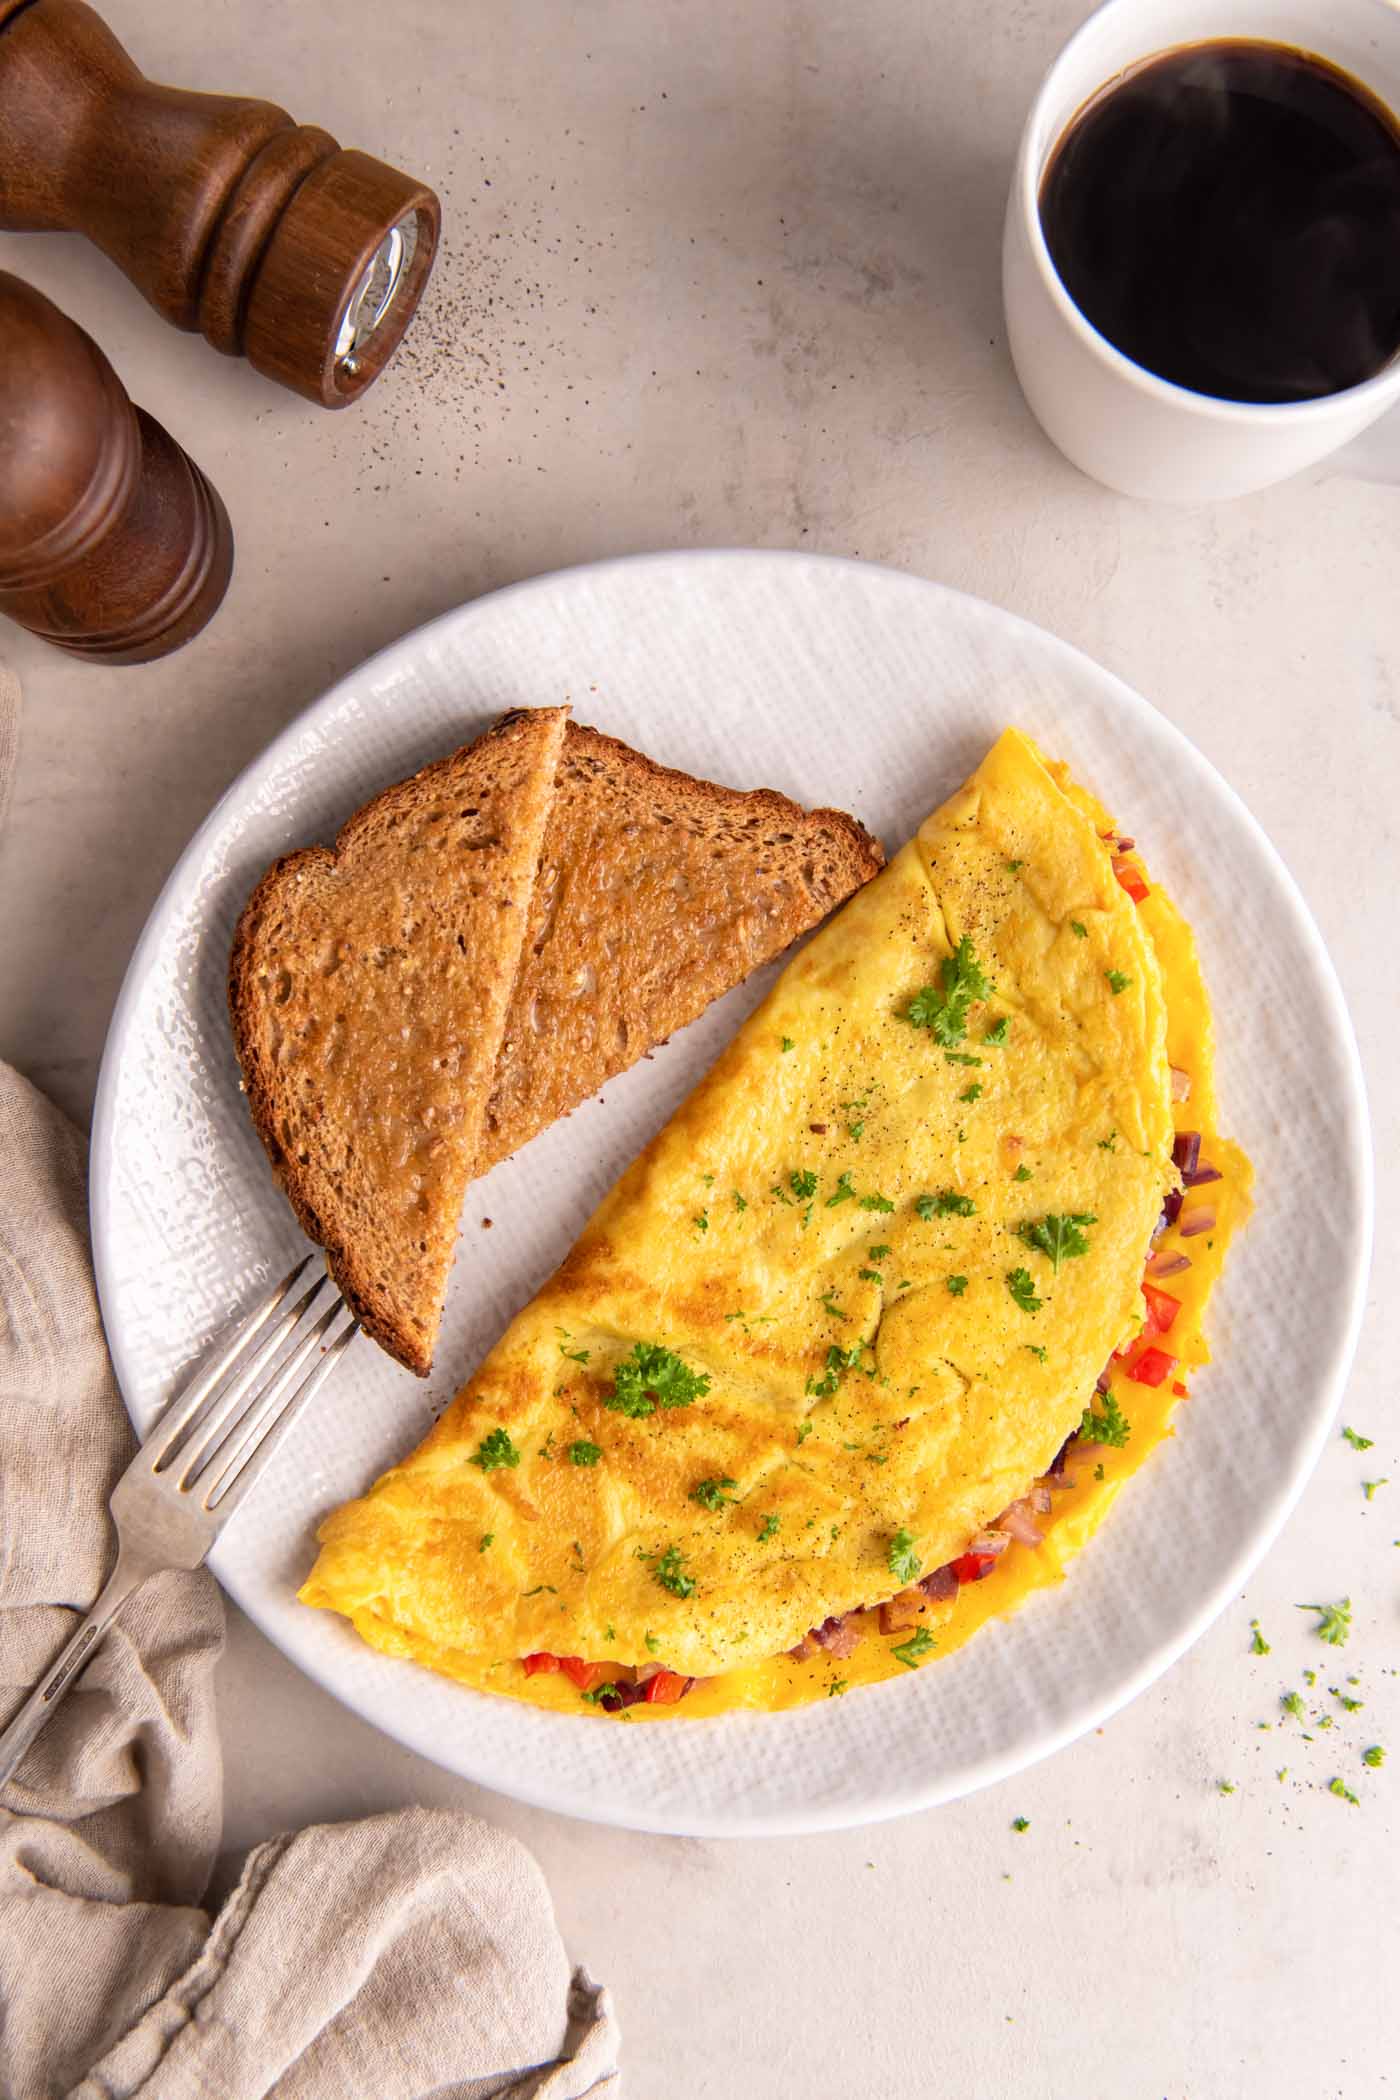 Omelet served with buttered toast and coffee.